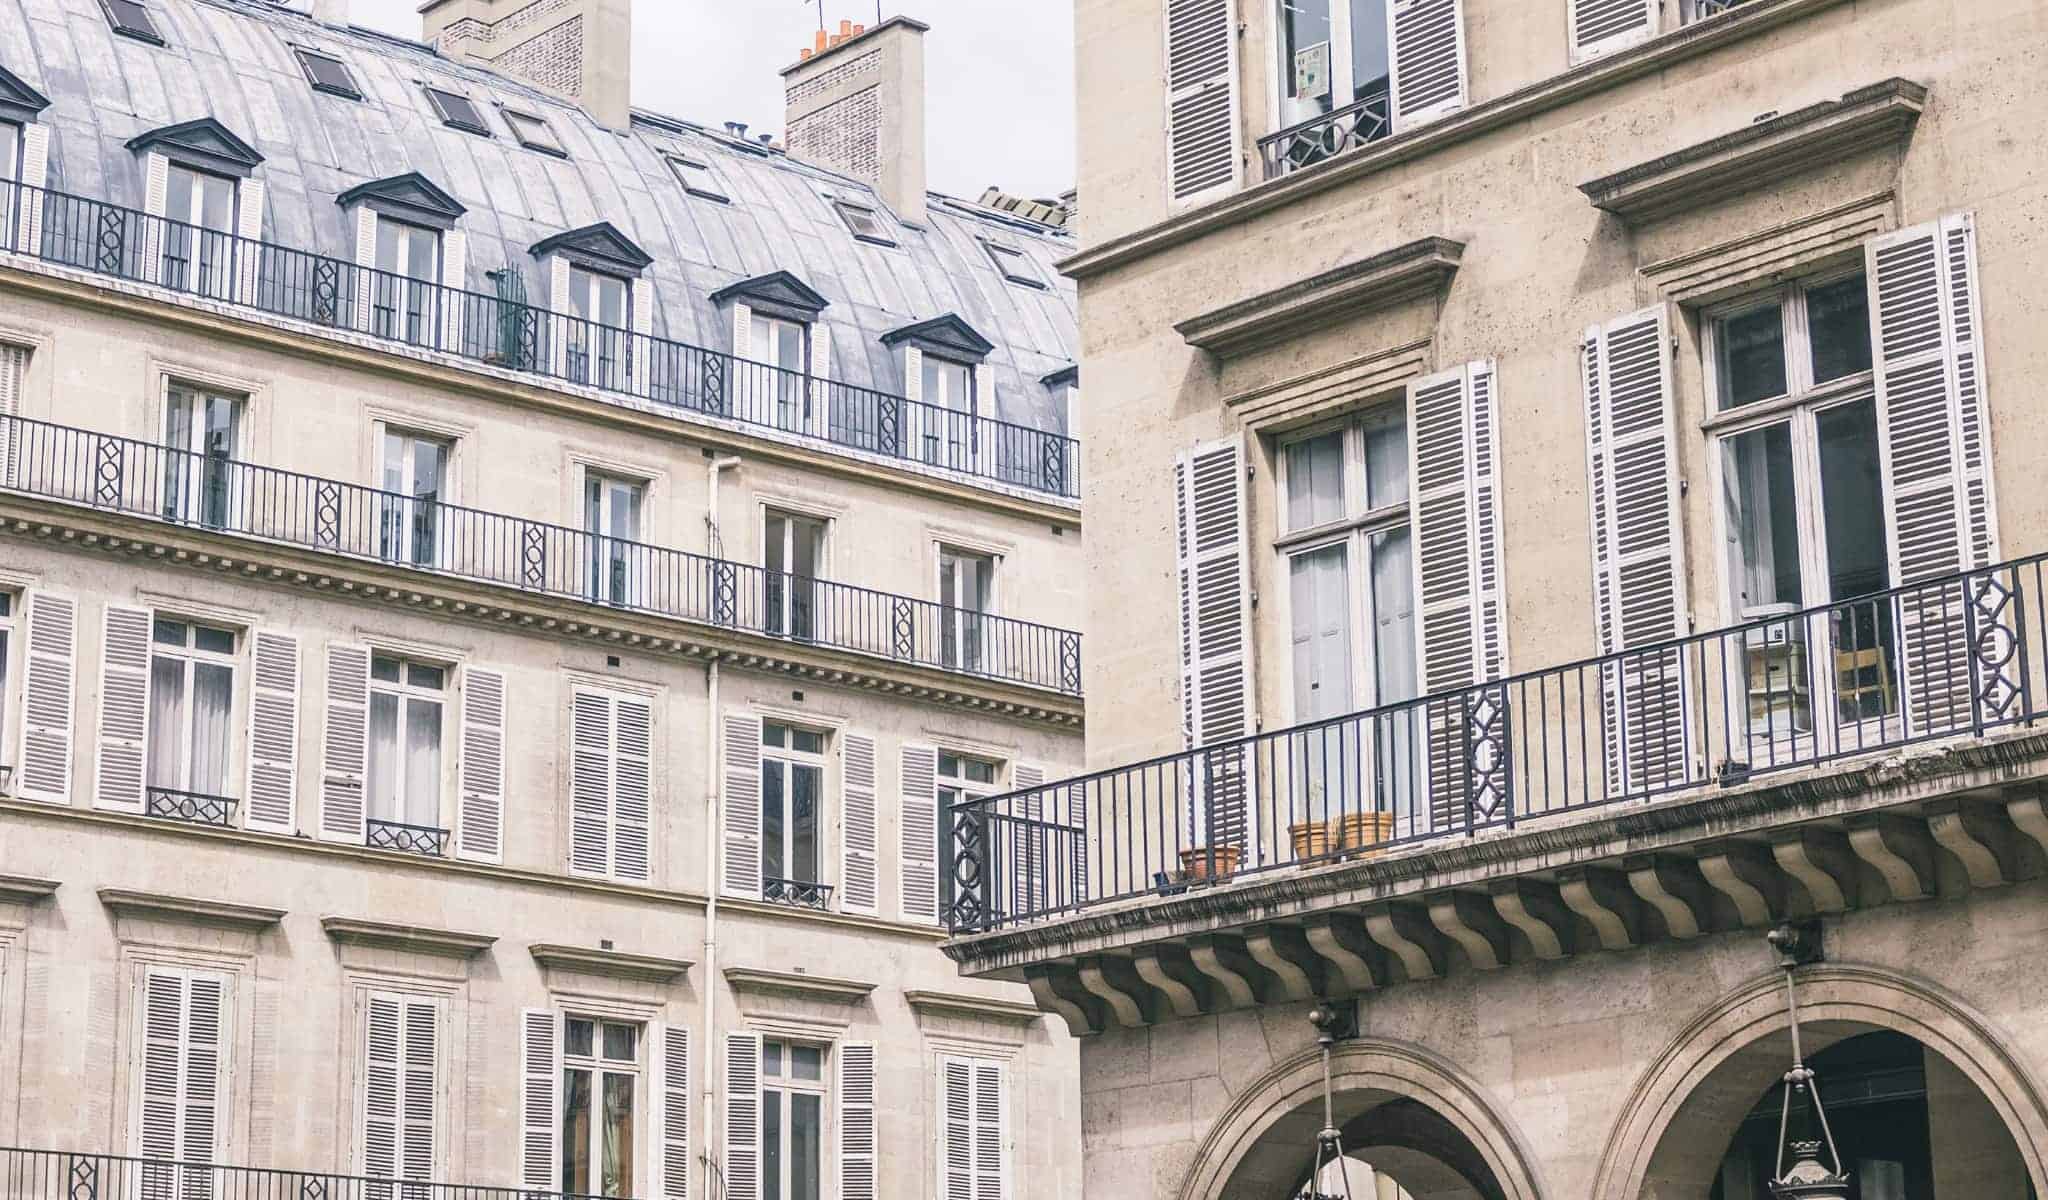 A view of building facades and balconies in Paris